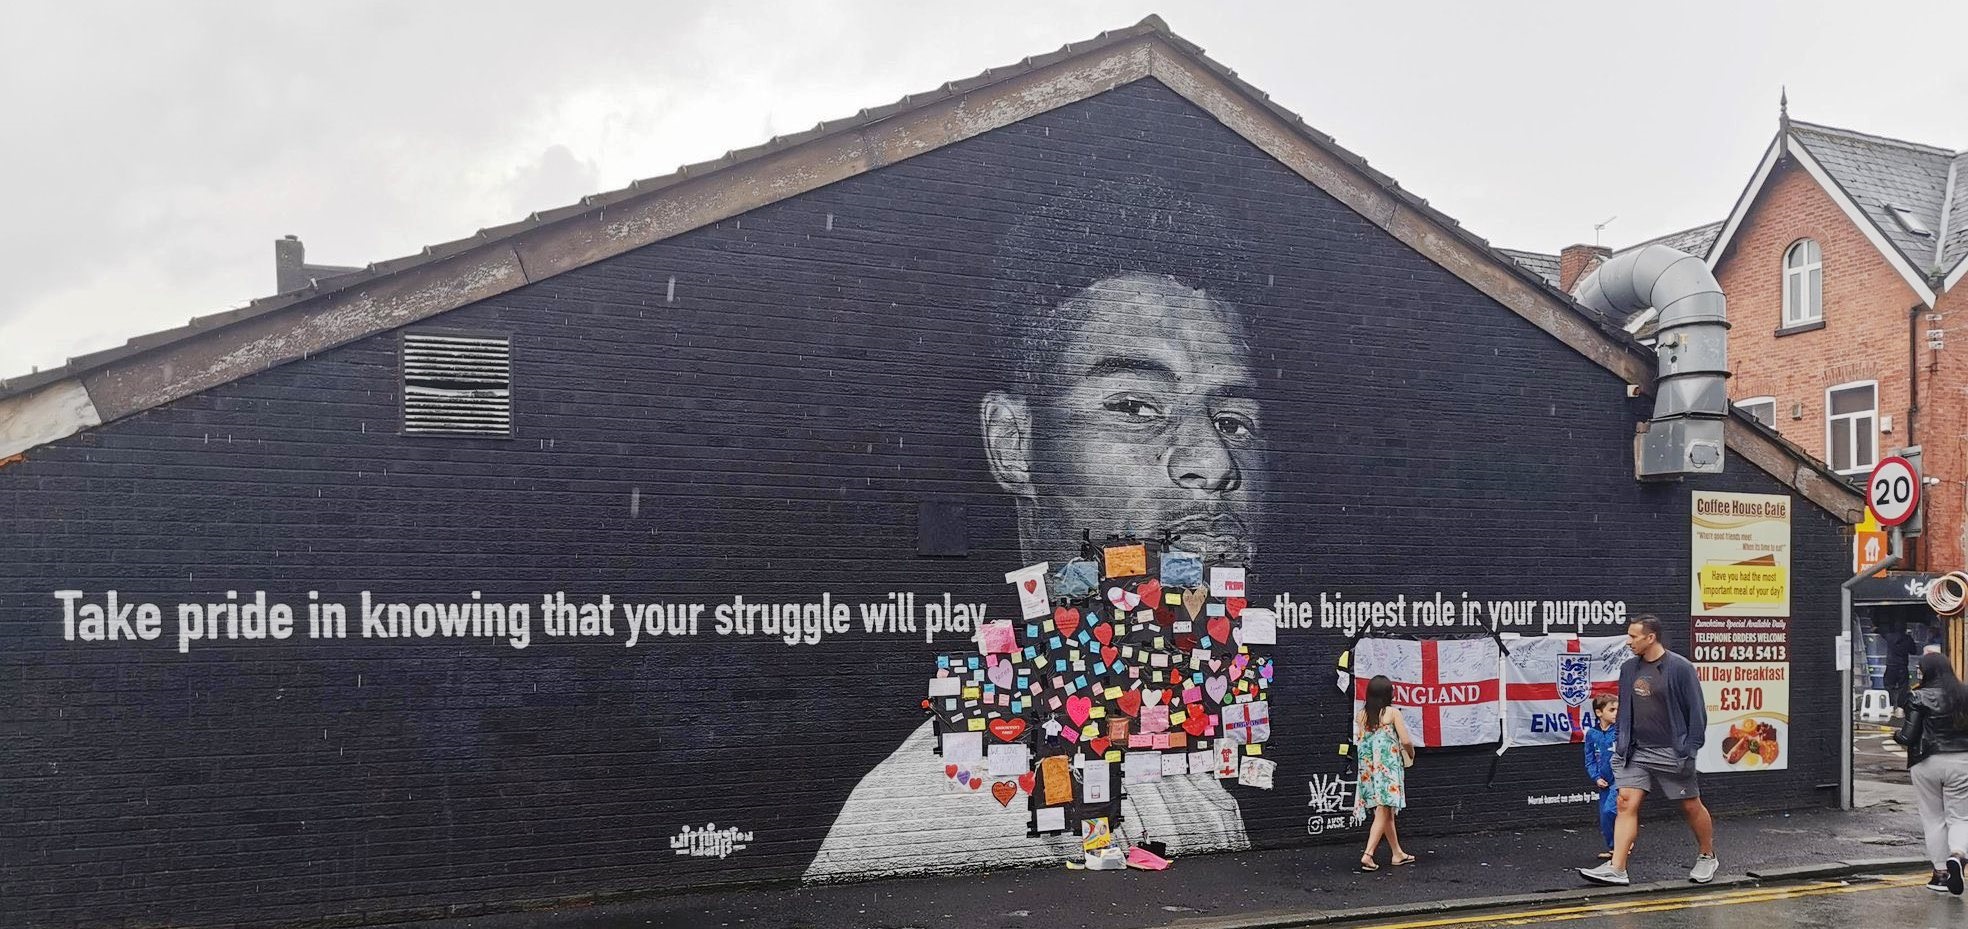 Hearts and notes on defaced Marcus Rashford mural - enlarge